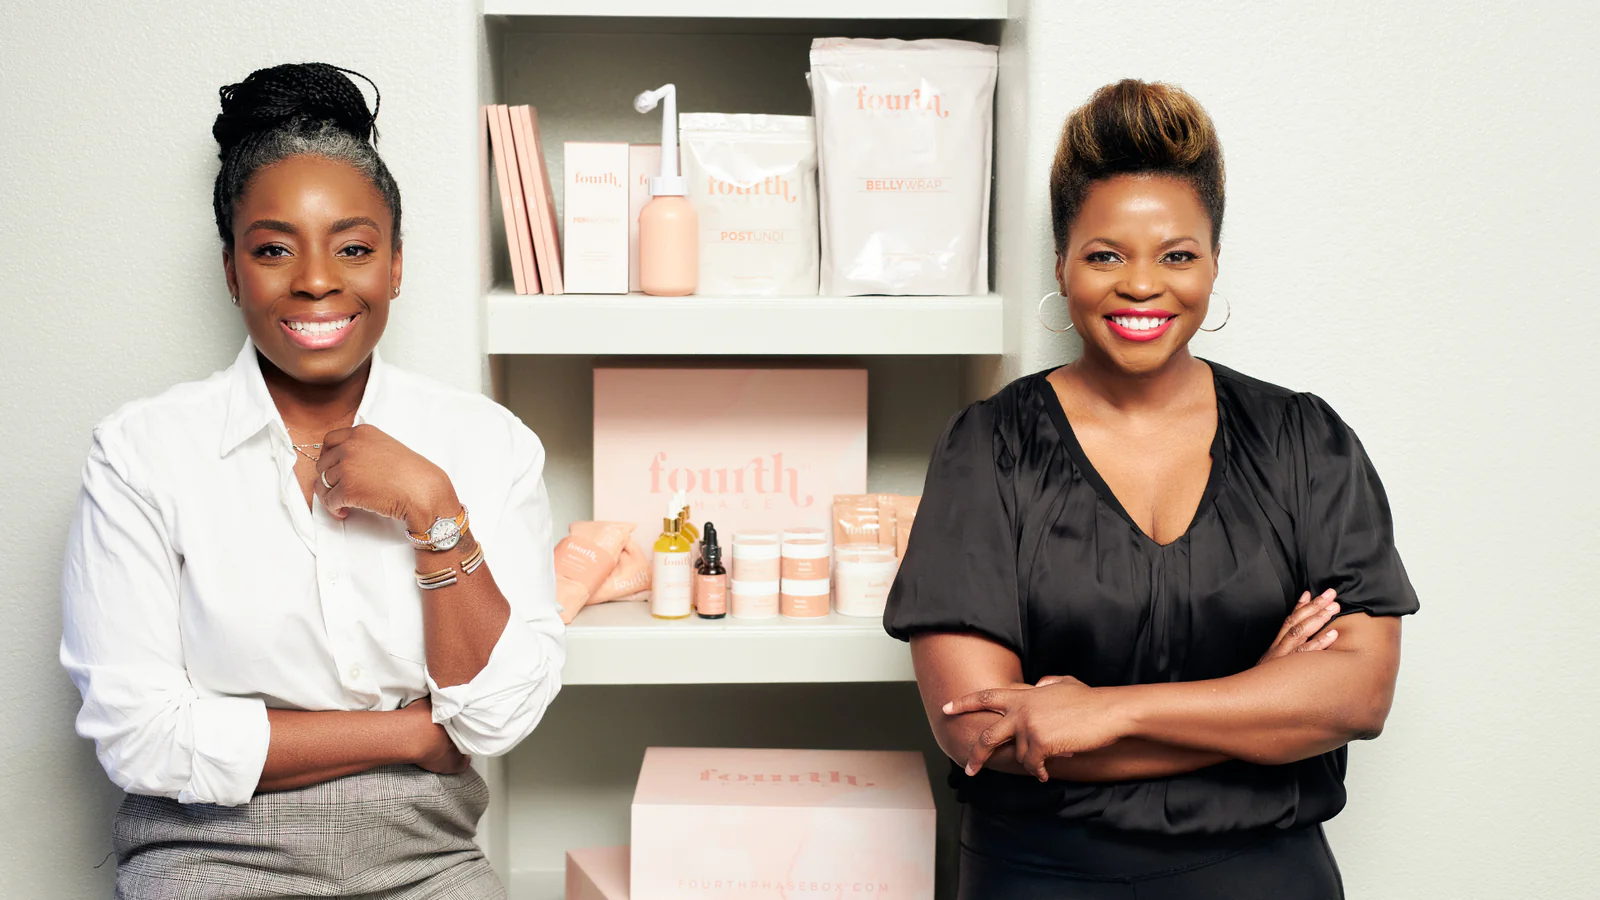 Looking for Maternal Resources?These Entrepreneurs Are Making a Difference